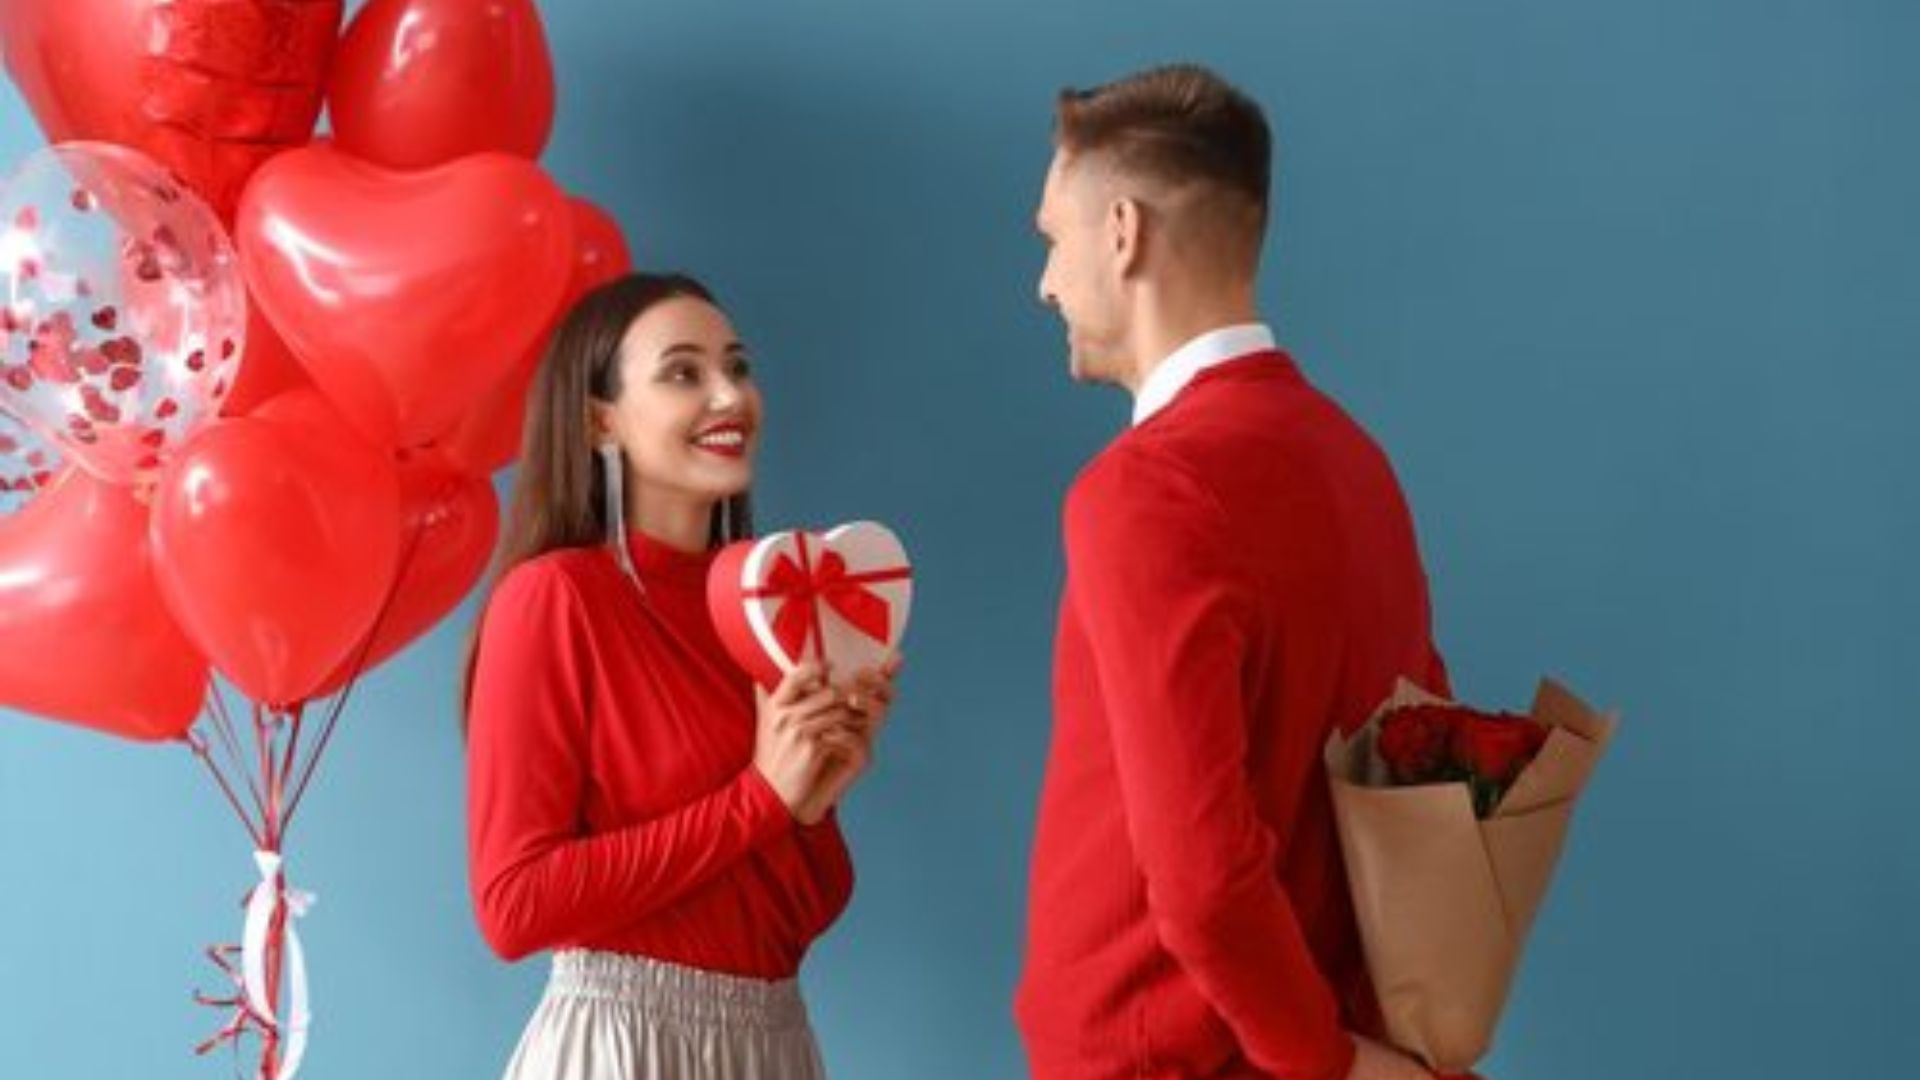 Unique traditions associated with Valentine’s Day